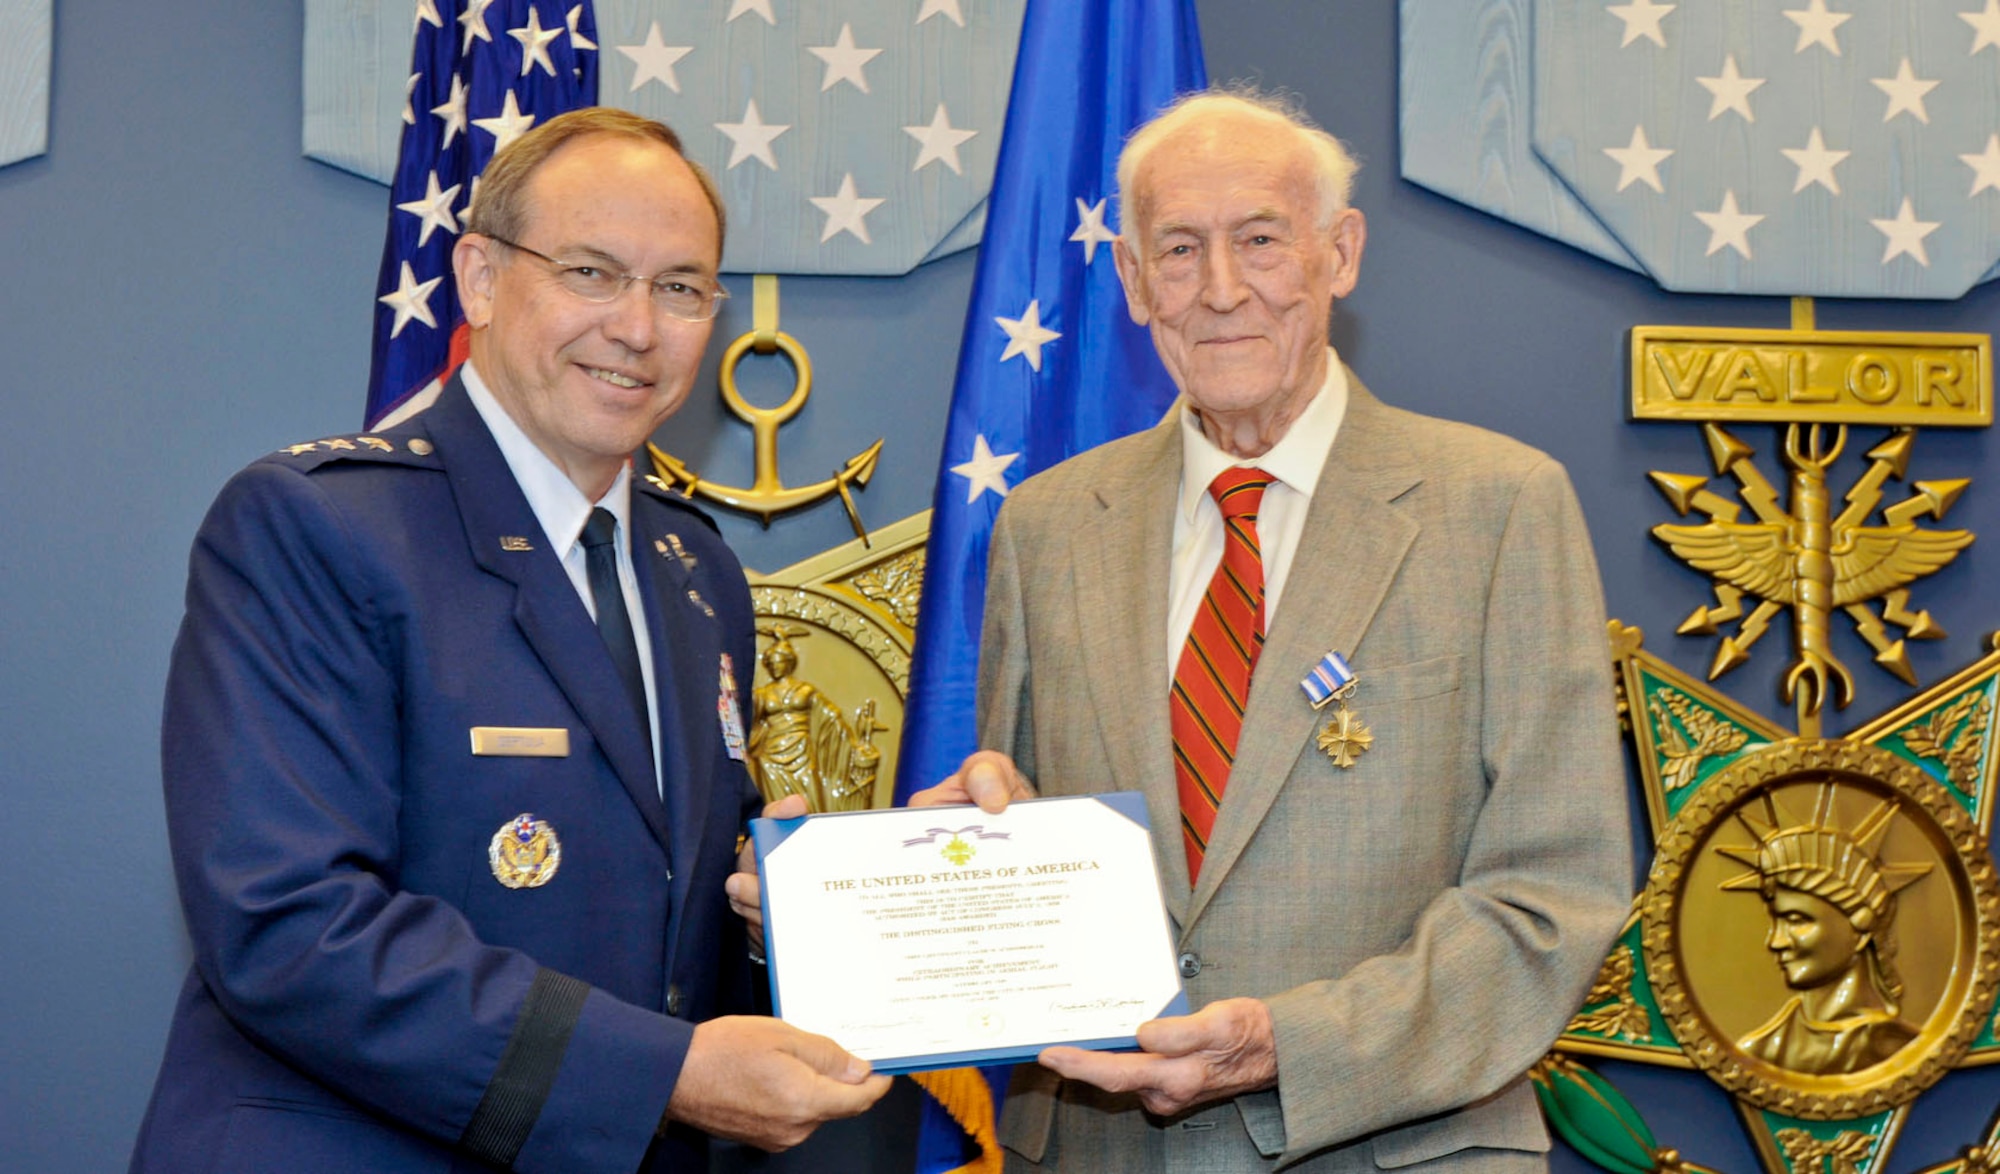 Retired Col. Claude M. Schonberger poses with Lt. Gen. David A. Deptula July 19, 2010, in the Pentagon's Hall of Heroes after being presented with the Distinguished Flying Cross. General Deptula is the deputy chief of staff for intelligence, surveillance and reconnaissance at Headquarters Air Force. (U.S. Air Force photo/Michael Pausic)